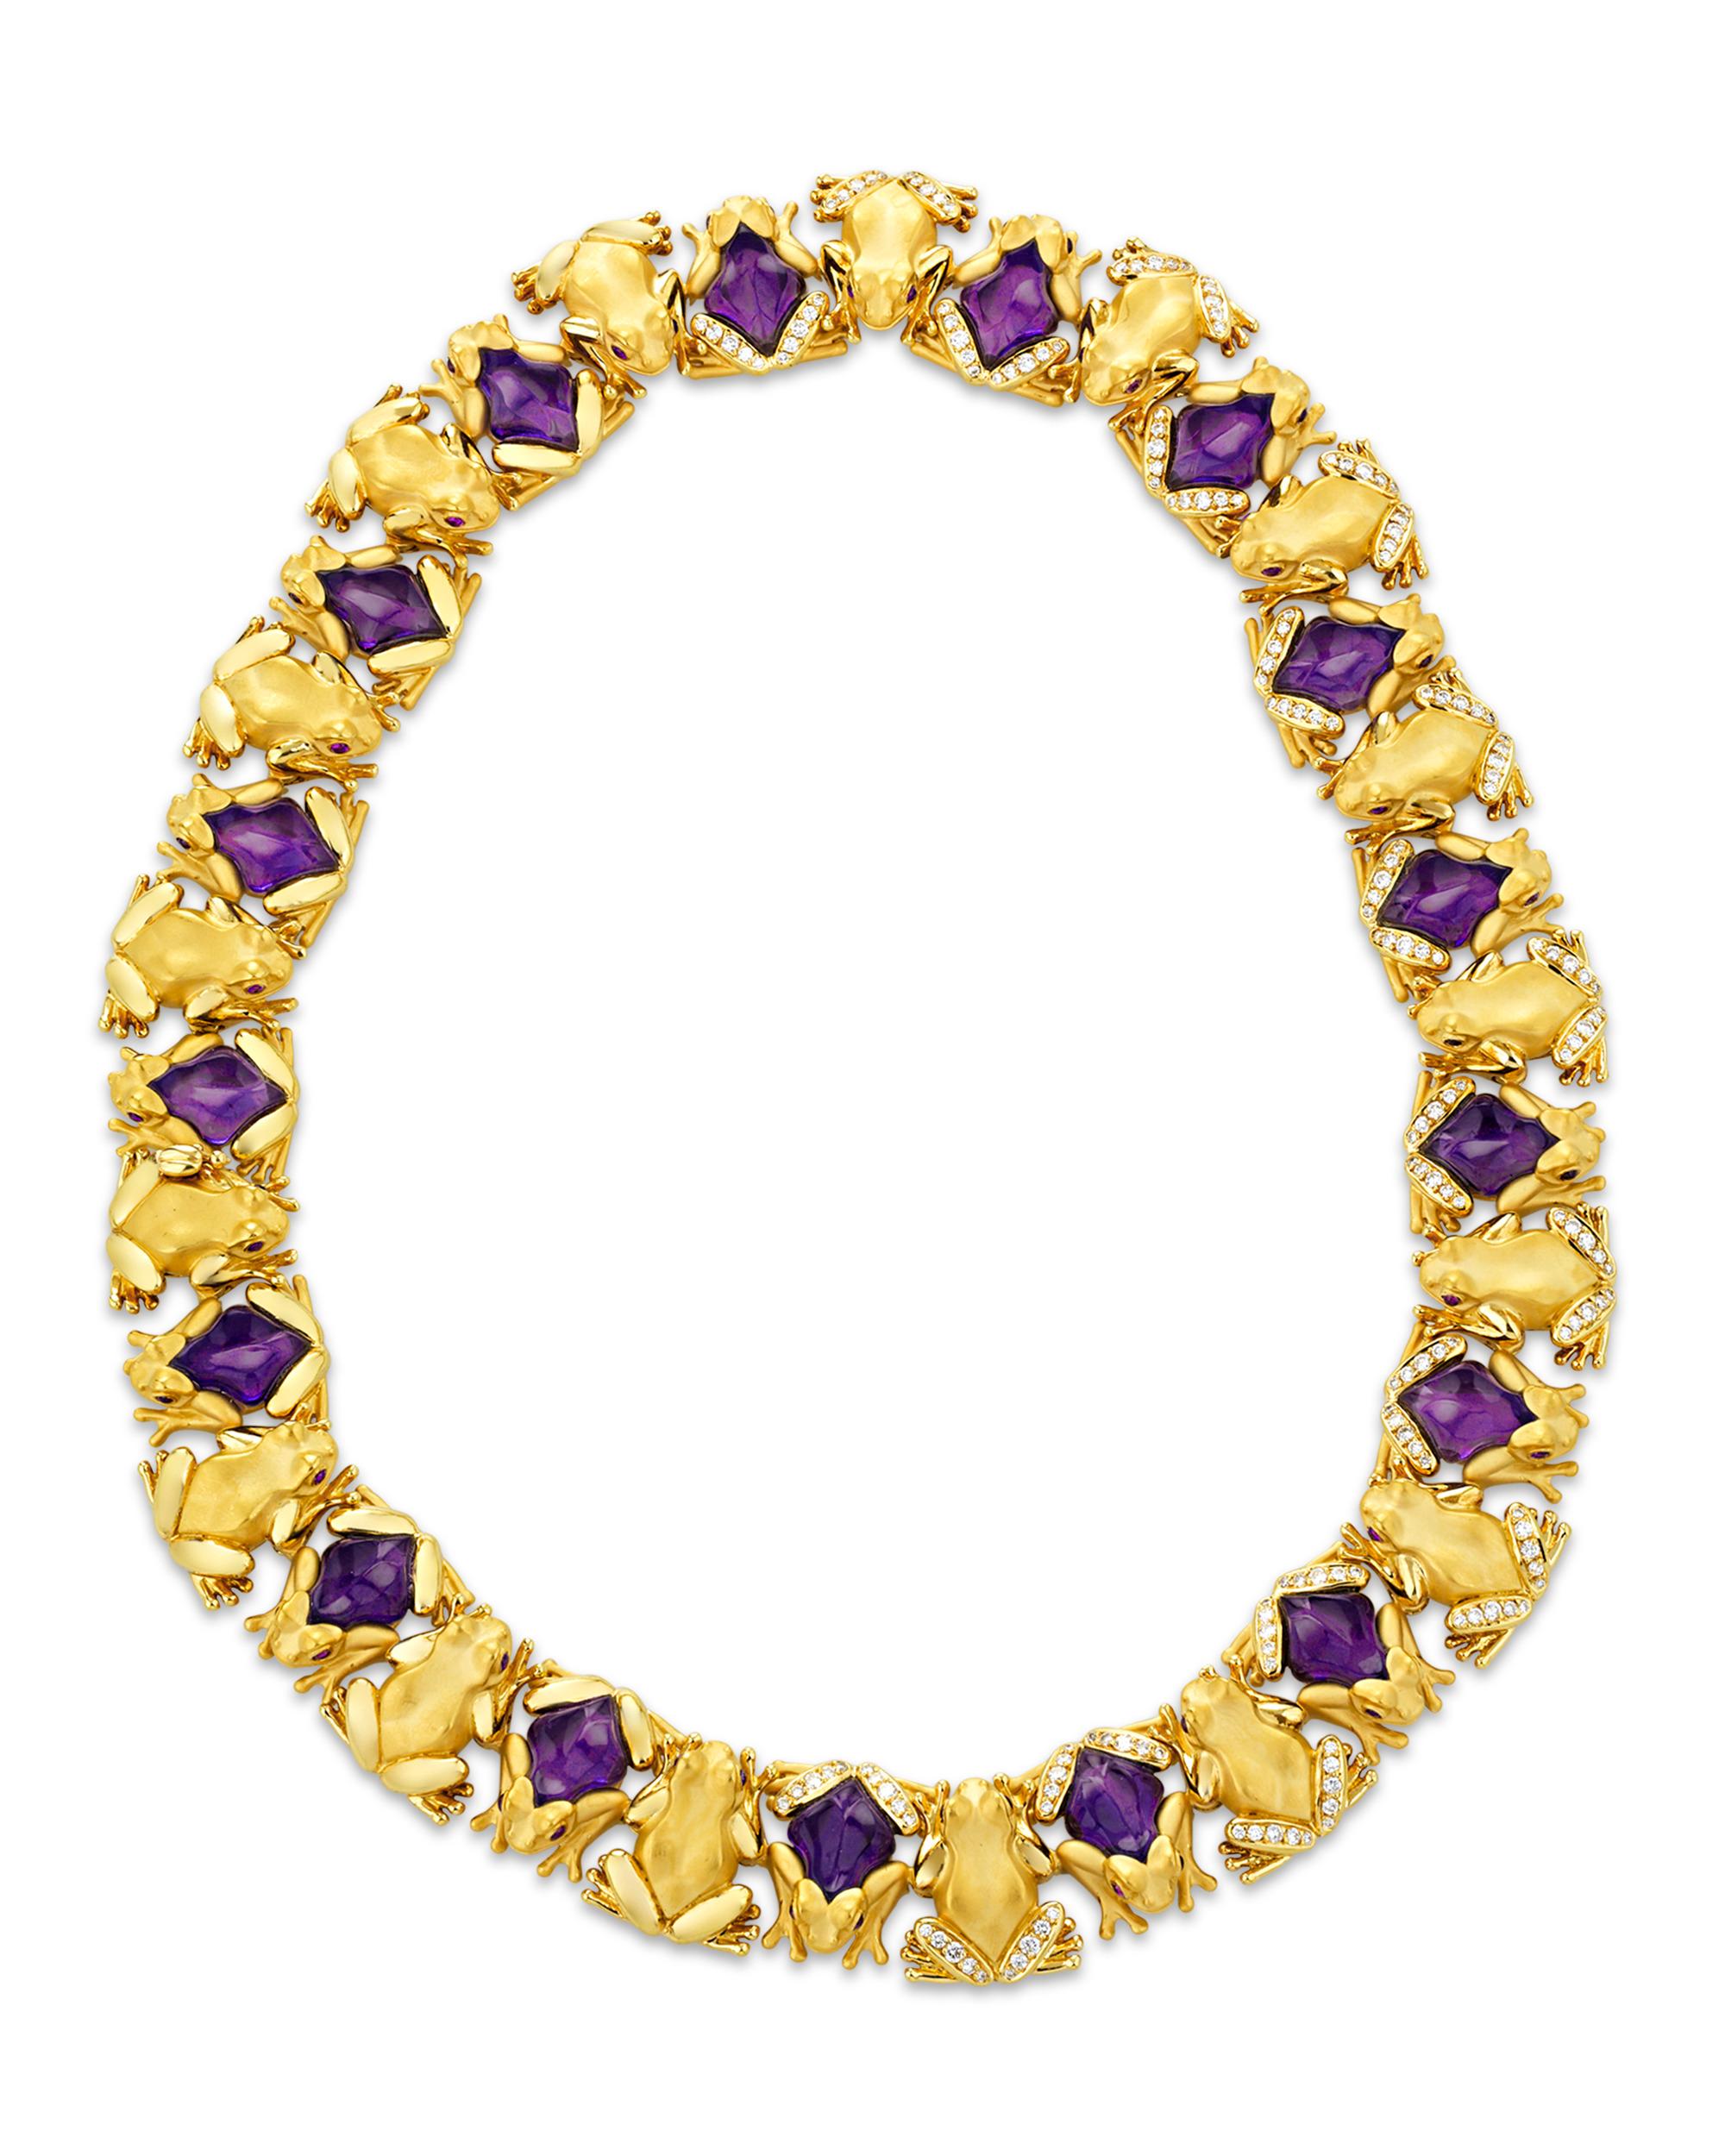 This enchanting necklace features 17 dainty frogs cast in satin-finished 18K yellow gold, with alternating accents of diamonds and amethysts. Designed by historic Spanish jewelers Carrera y Carrera, these fine frogs’ smooth, lavender-hued bodies are